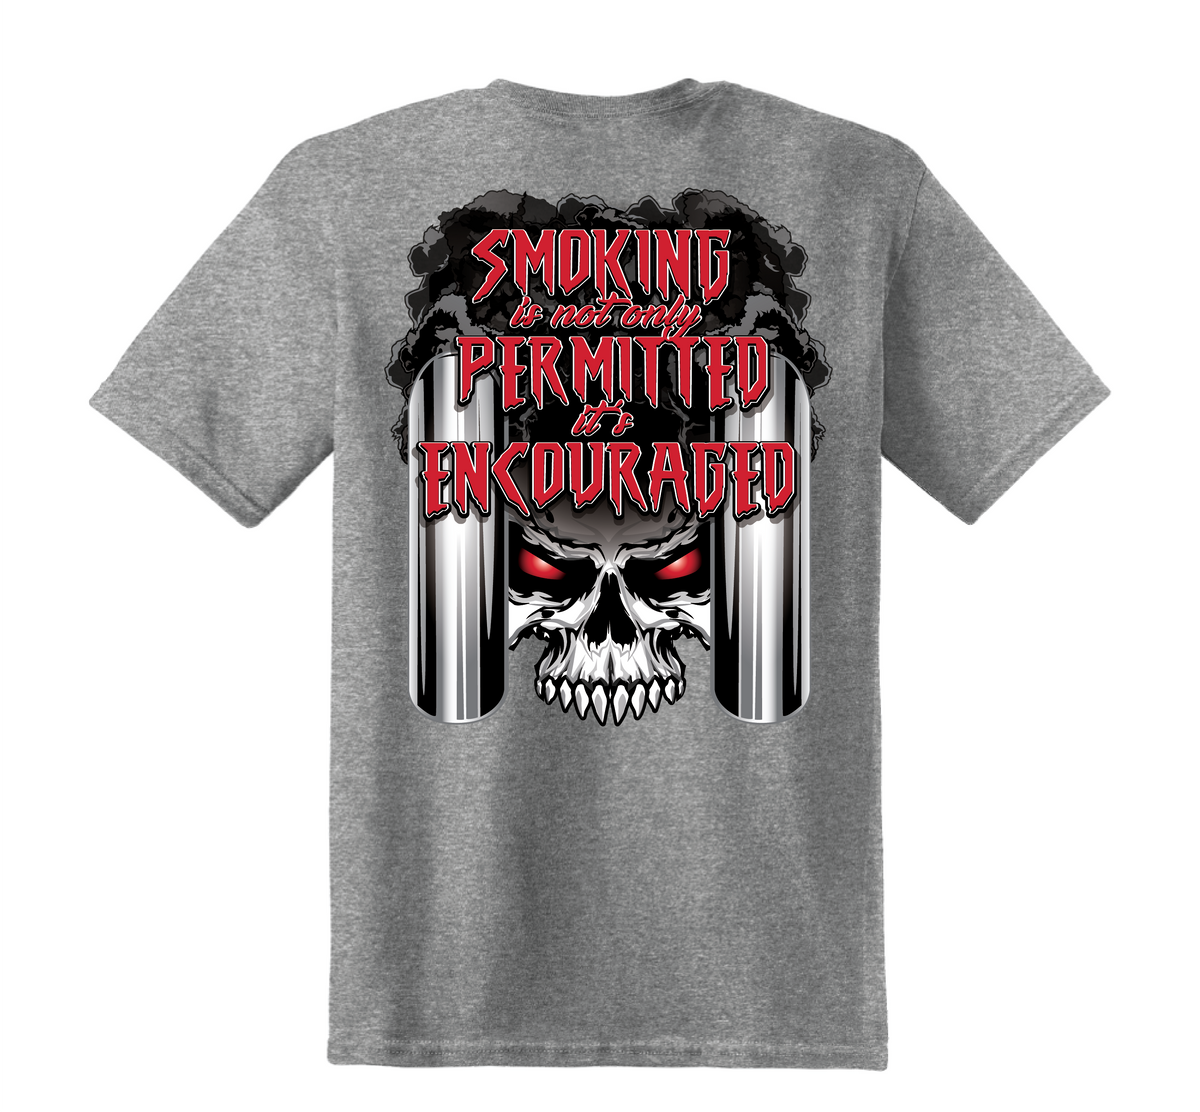 Diesel Life Smoking Permitted T-Shirt